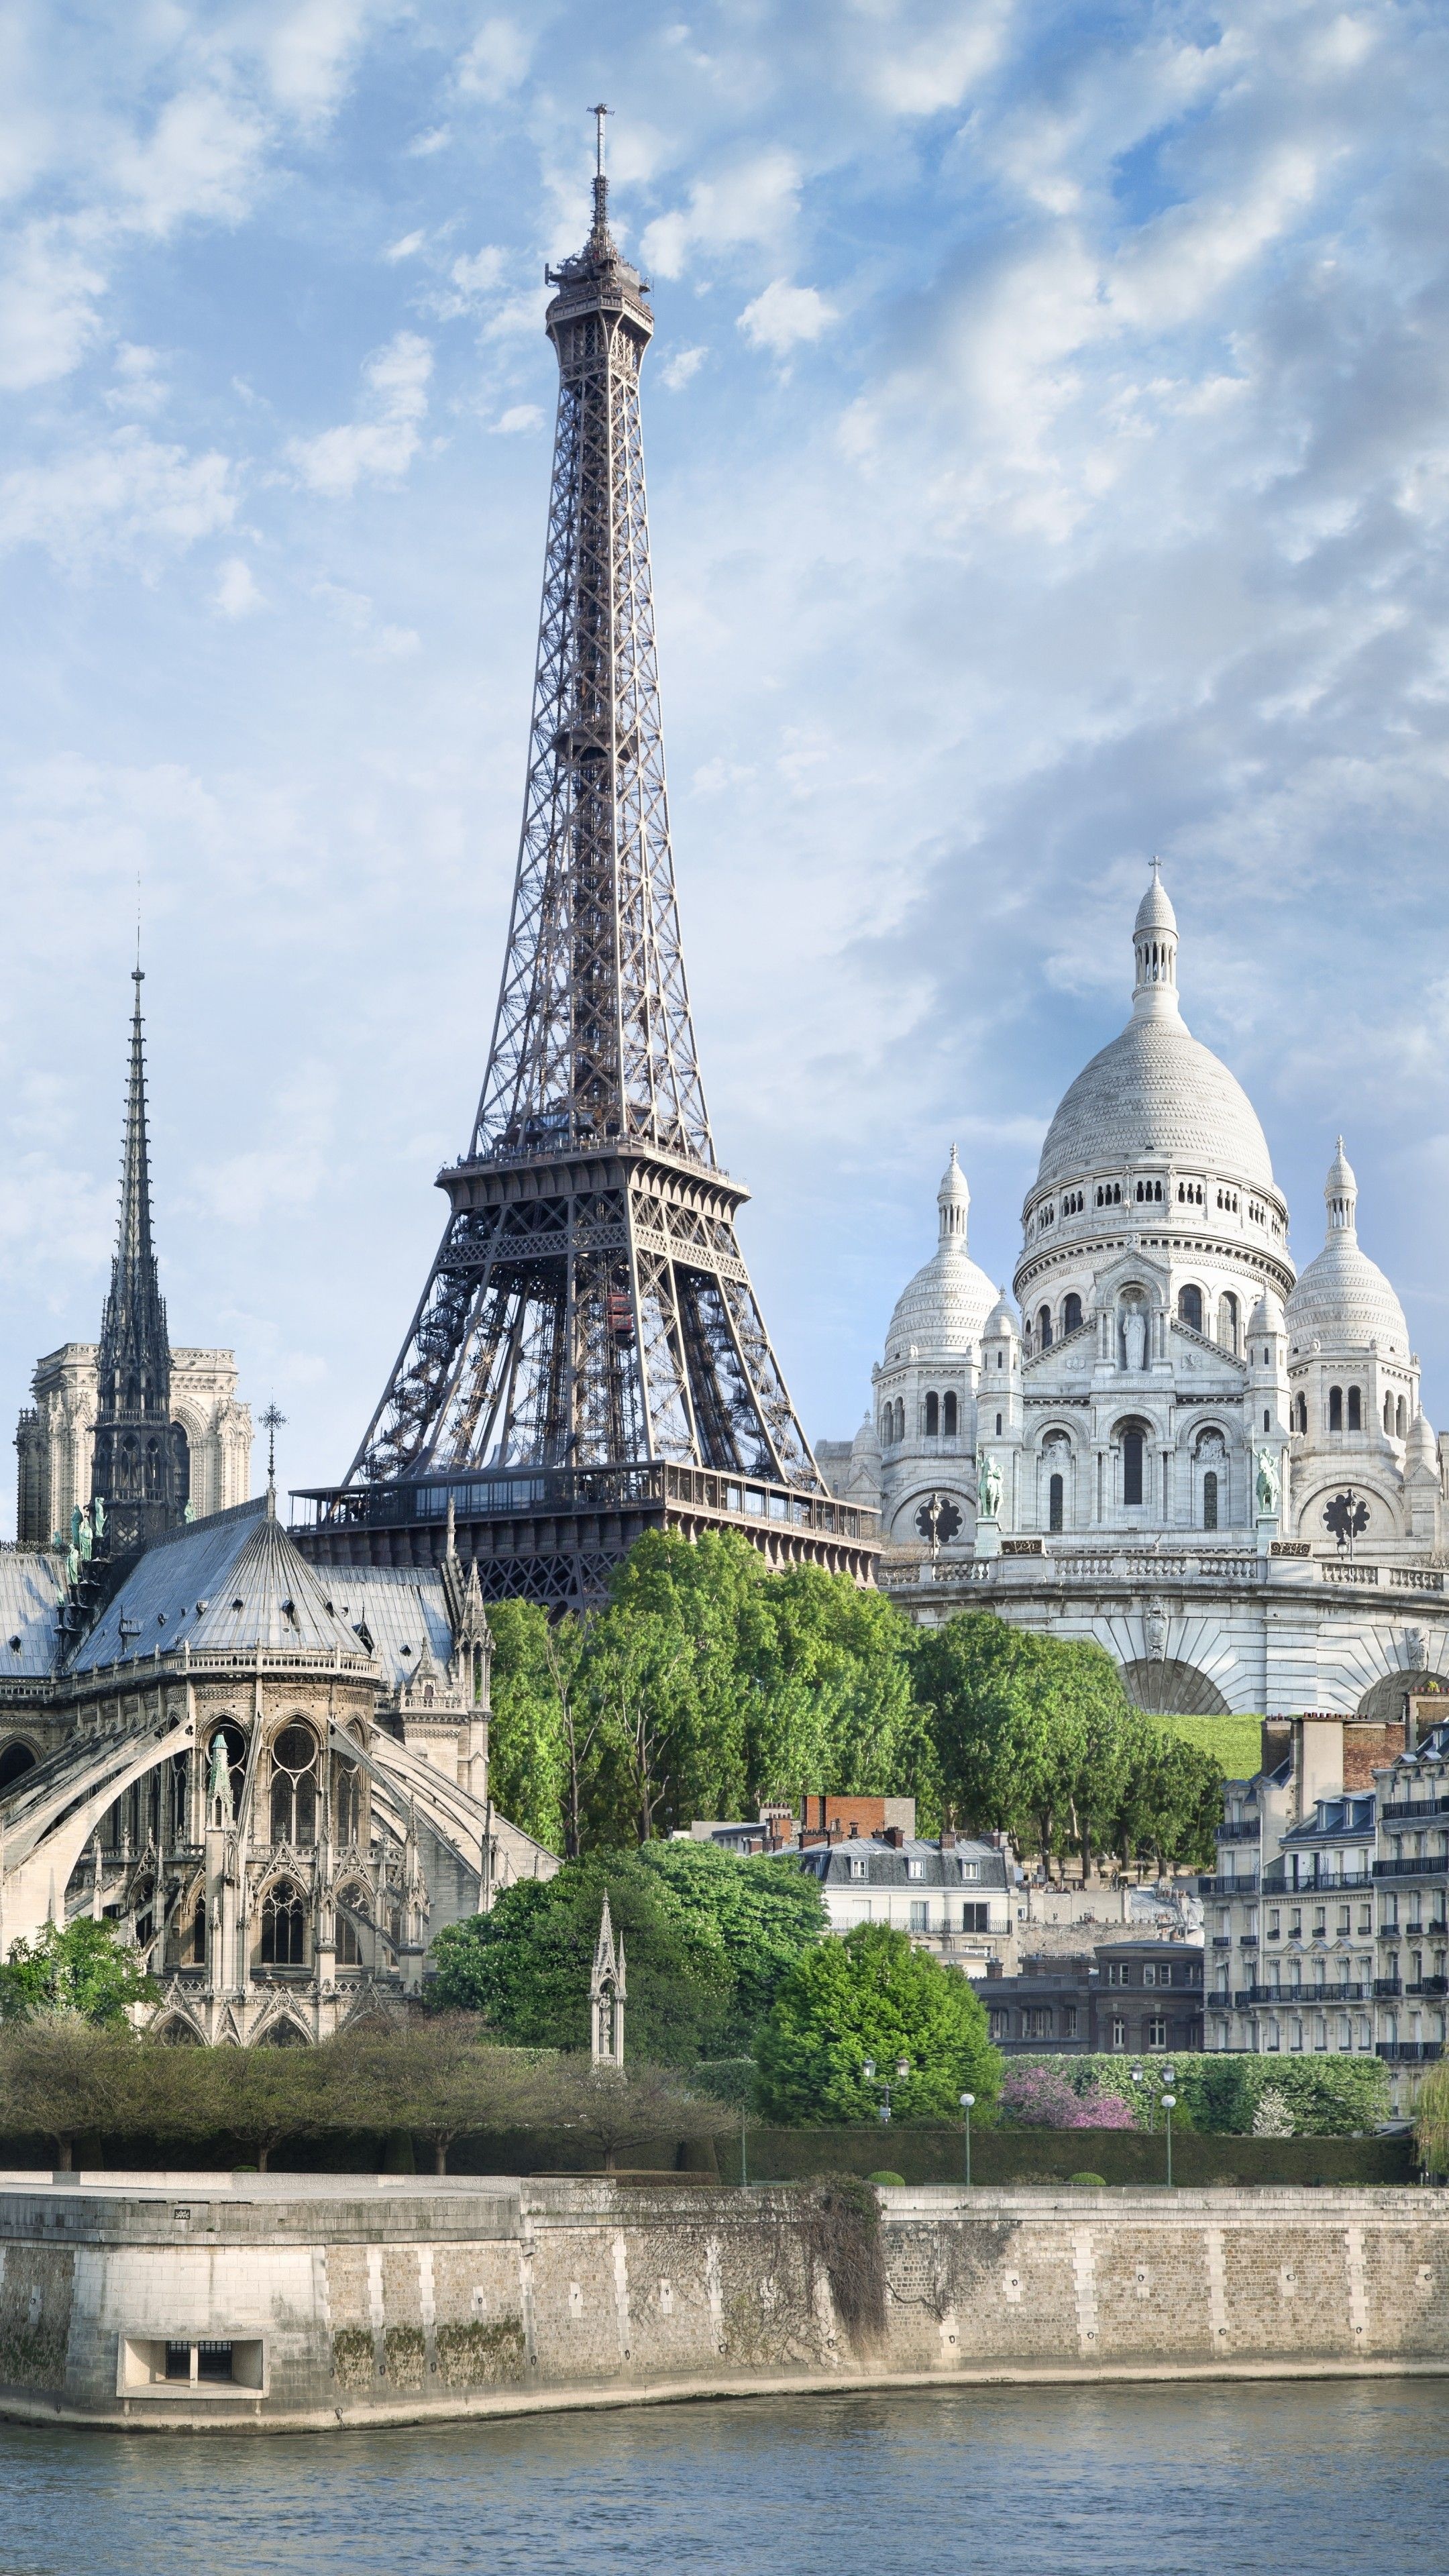 Paris: The historical district along the Seine in the city center has been classified as a UNESCO World Heritage Site since 1991. 2160x3840 4K Wallpaper.